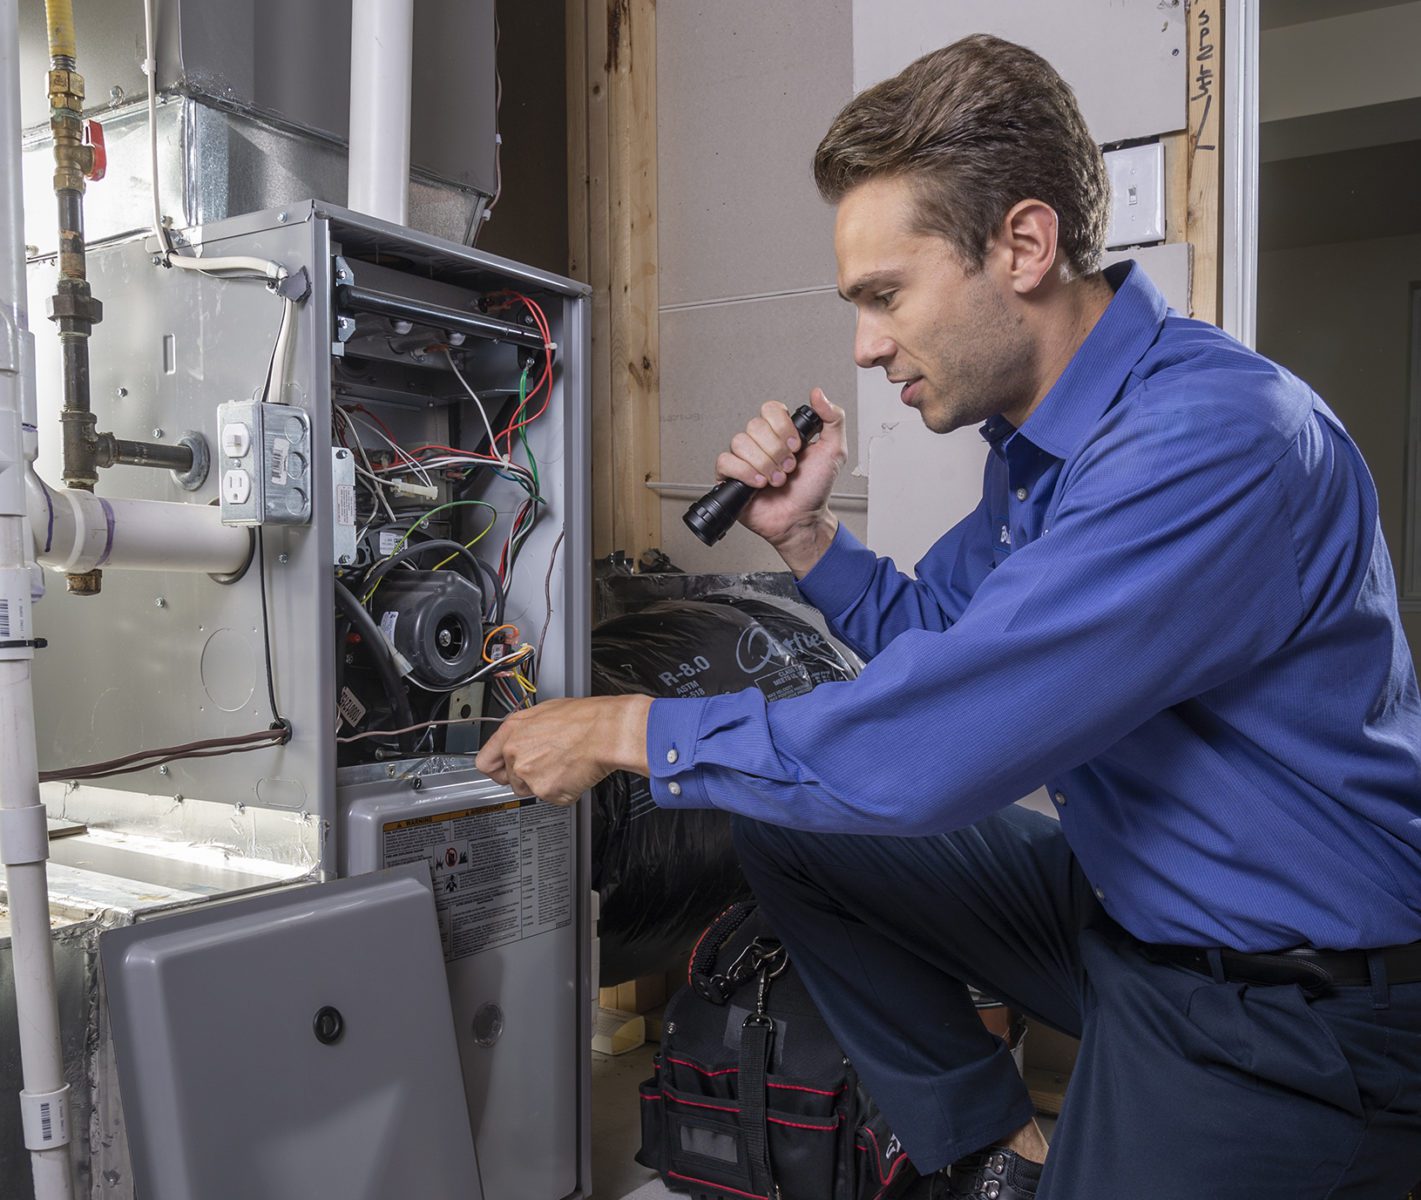 Heating Replacement Services in Atlanta, GA